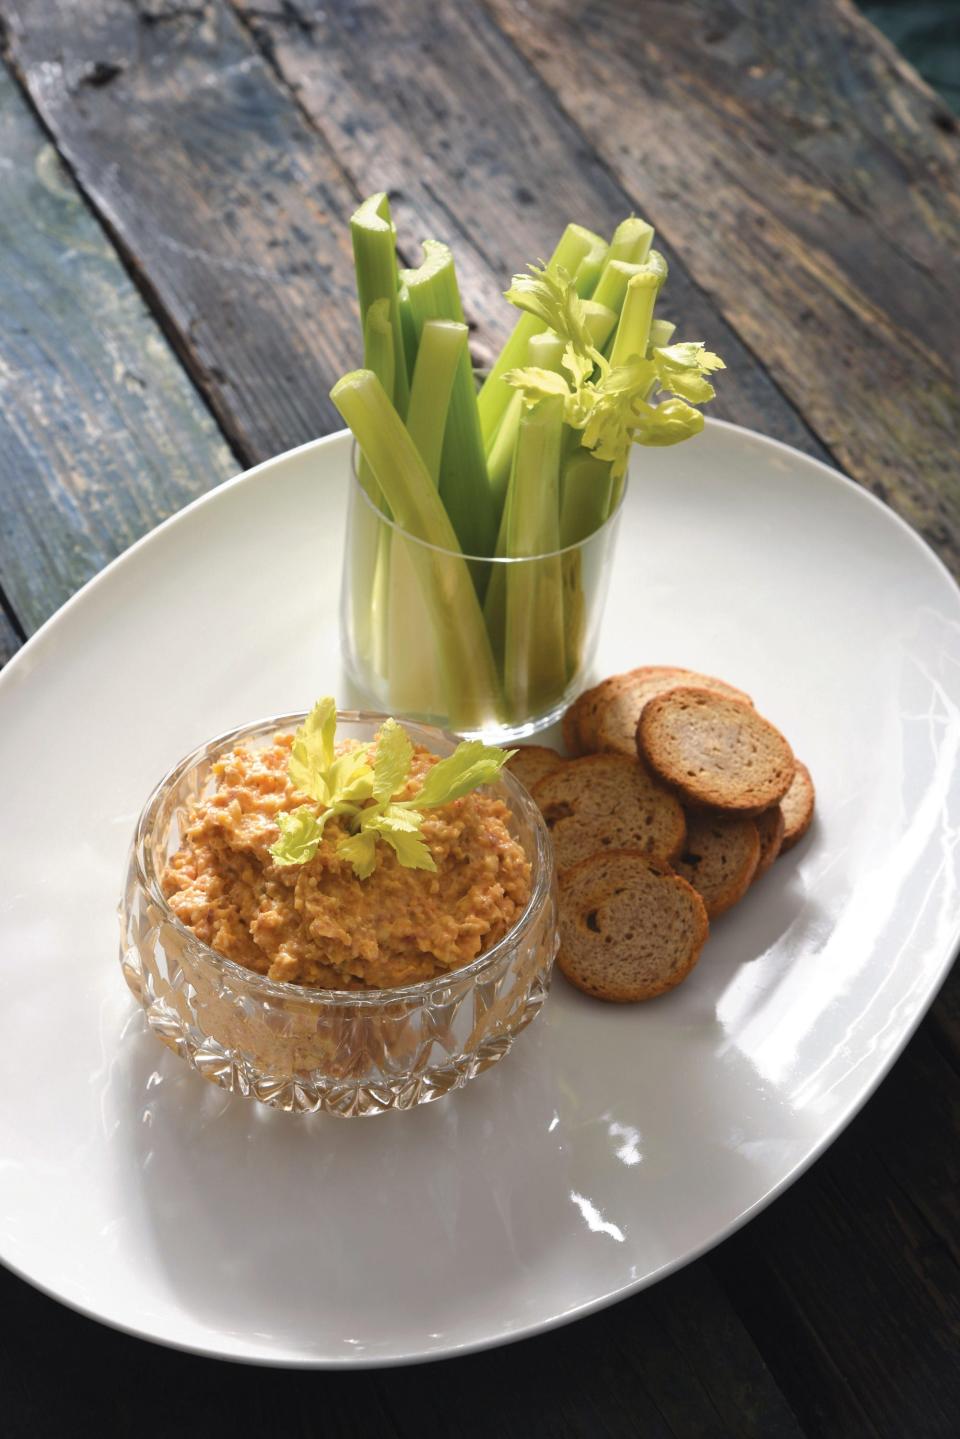 Bacon and Pecan Pimento Cheese recipe from The Bourbon Country Cookbook by David Danielson and Tim Laird